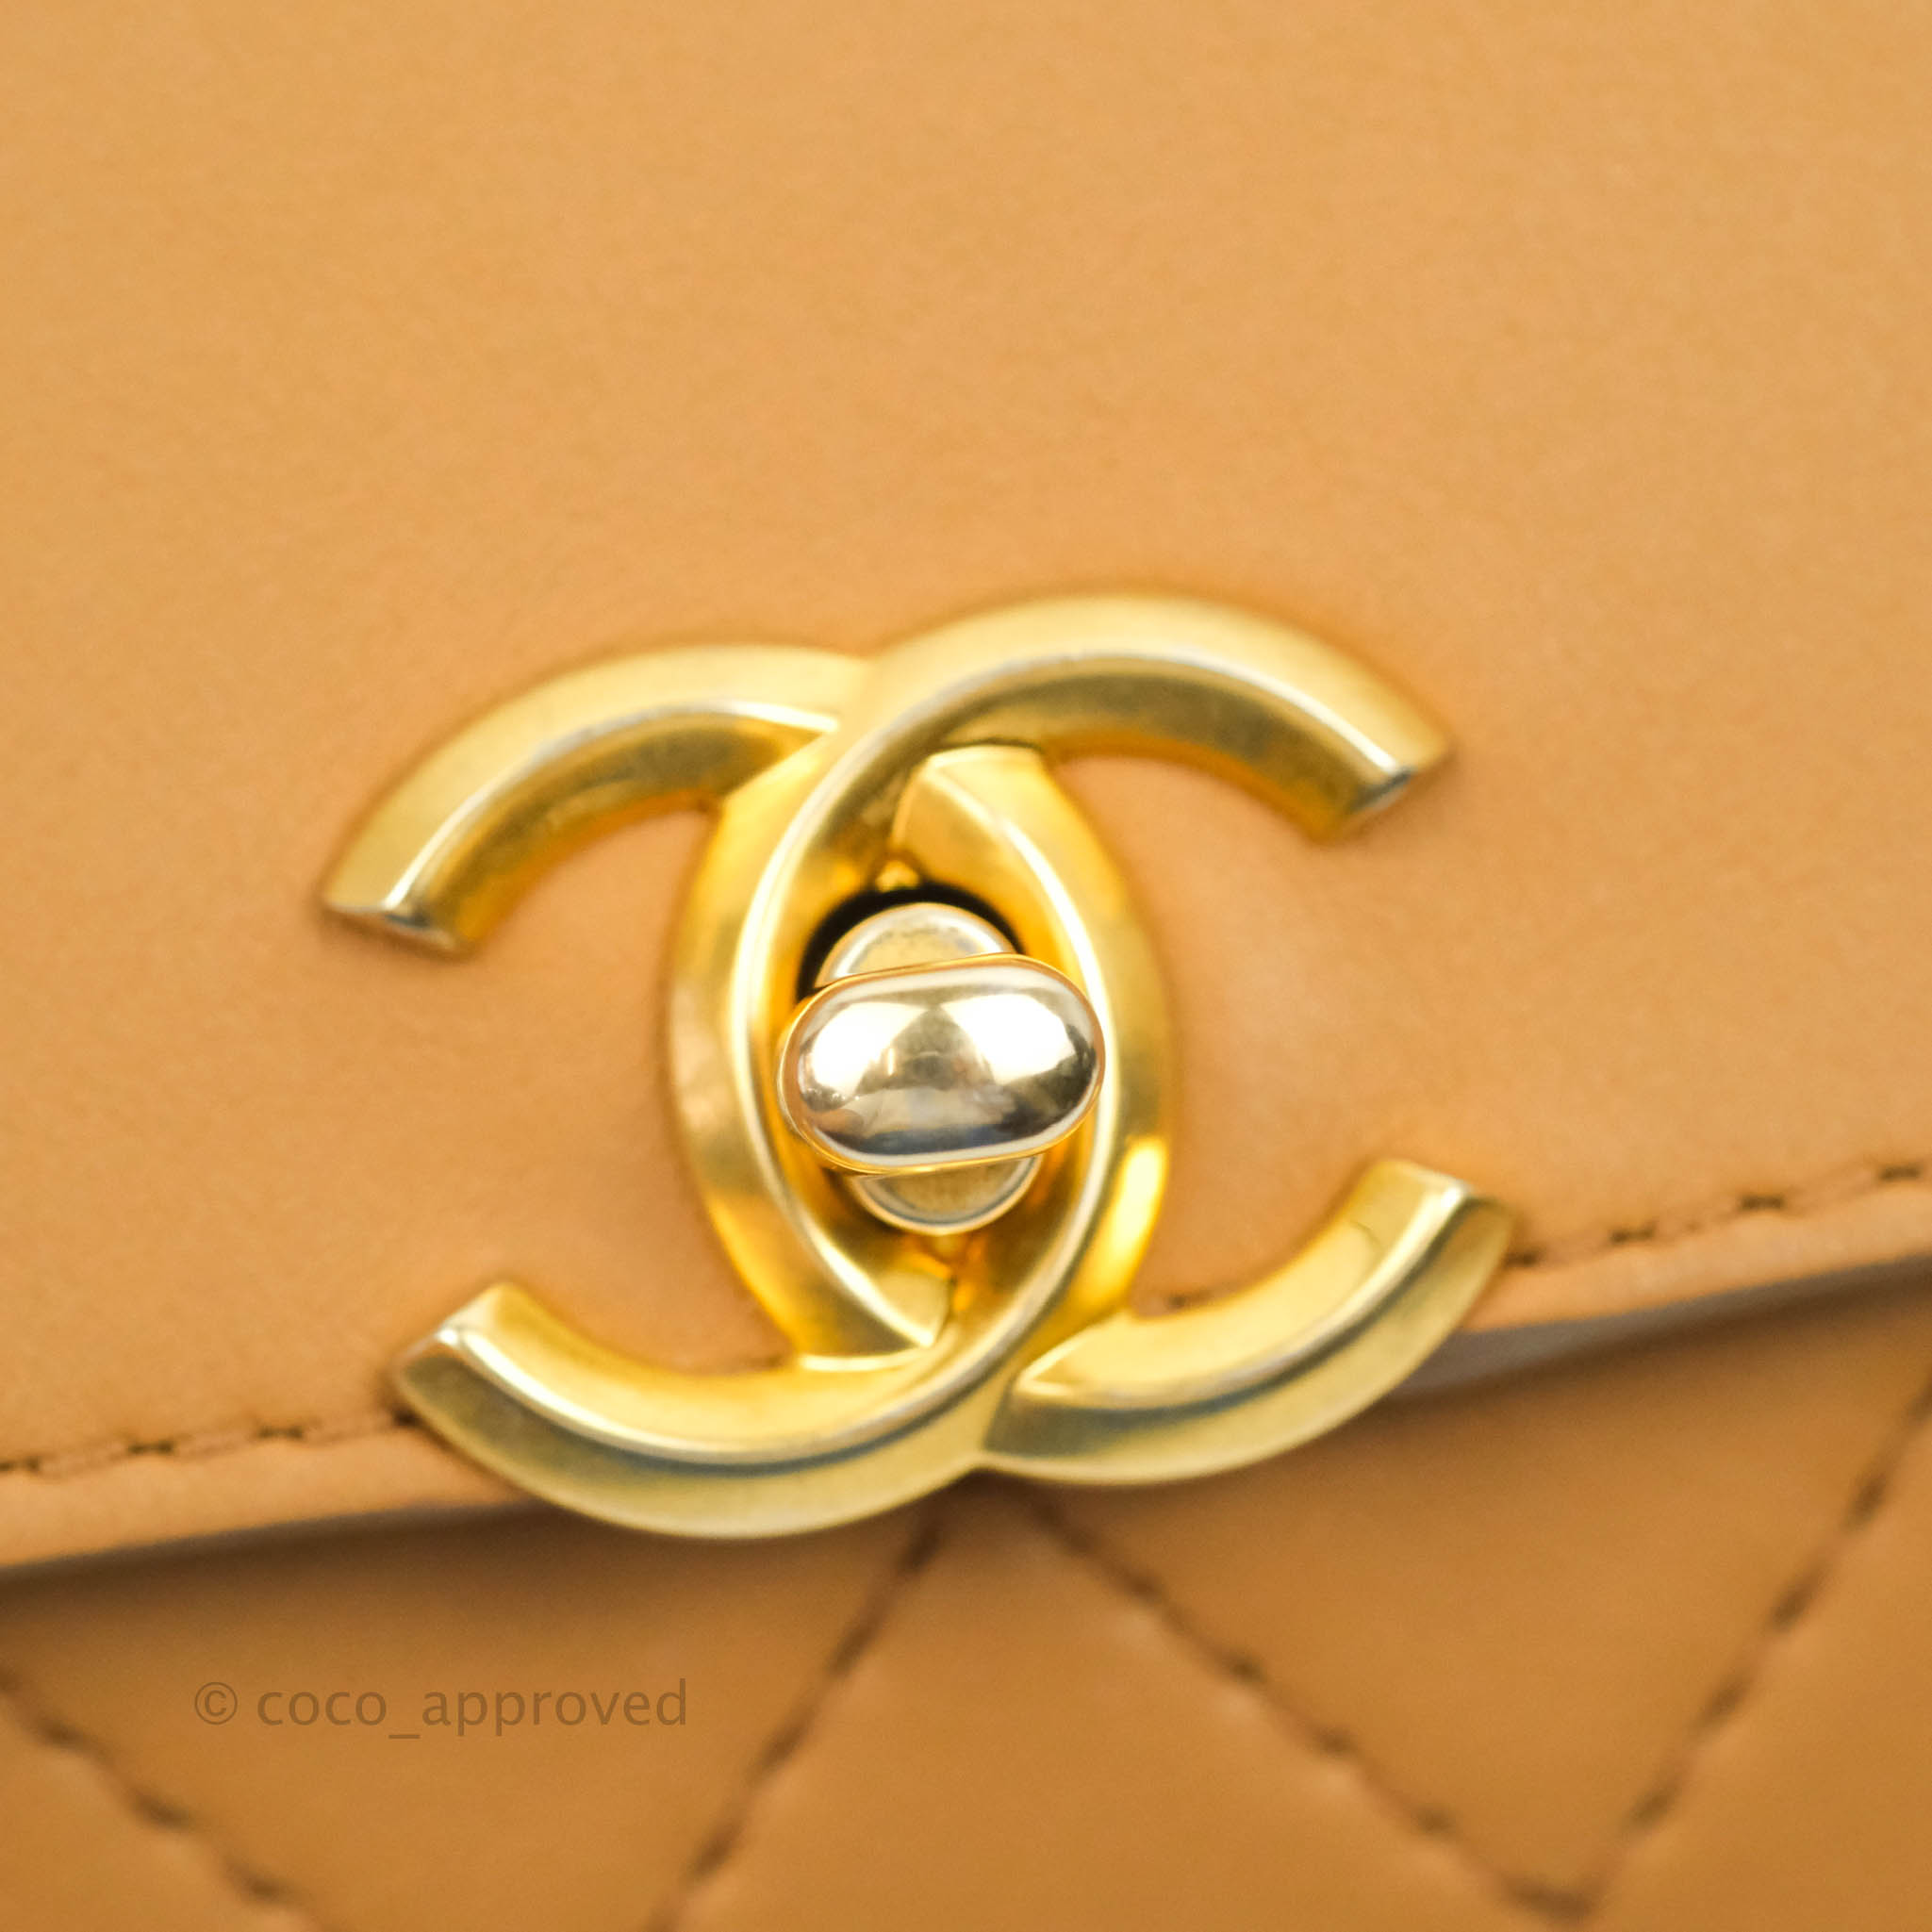 Chanel Womens Trendy Flap Bag Biscuit Lambskin Small – Luxe Collective